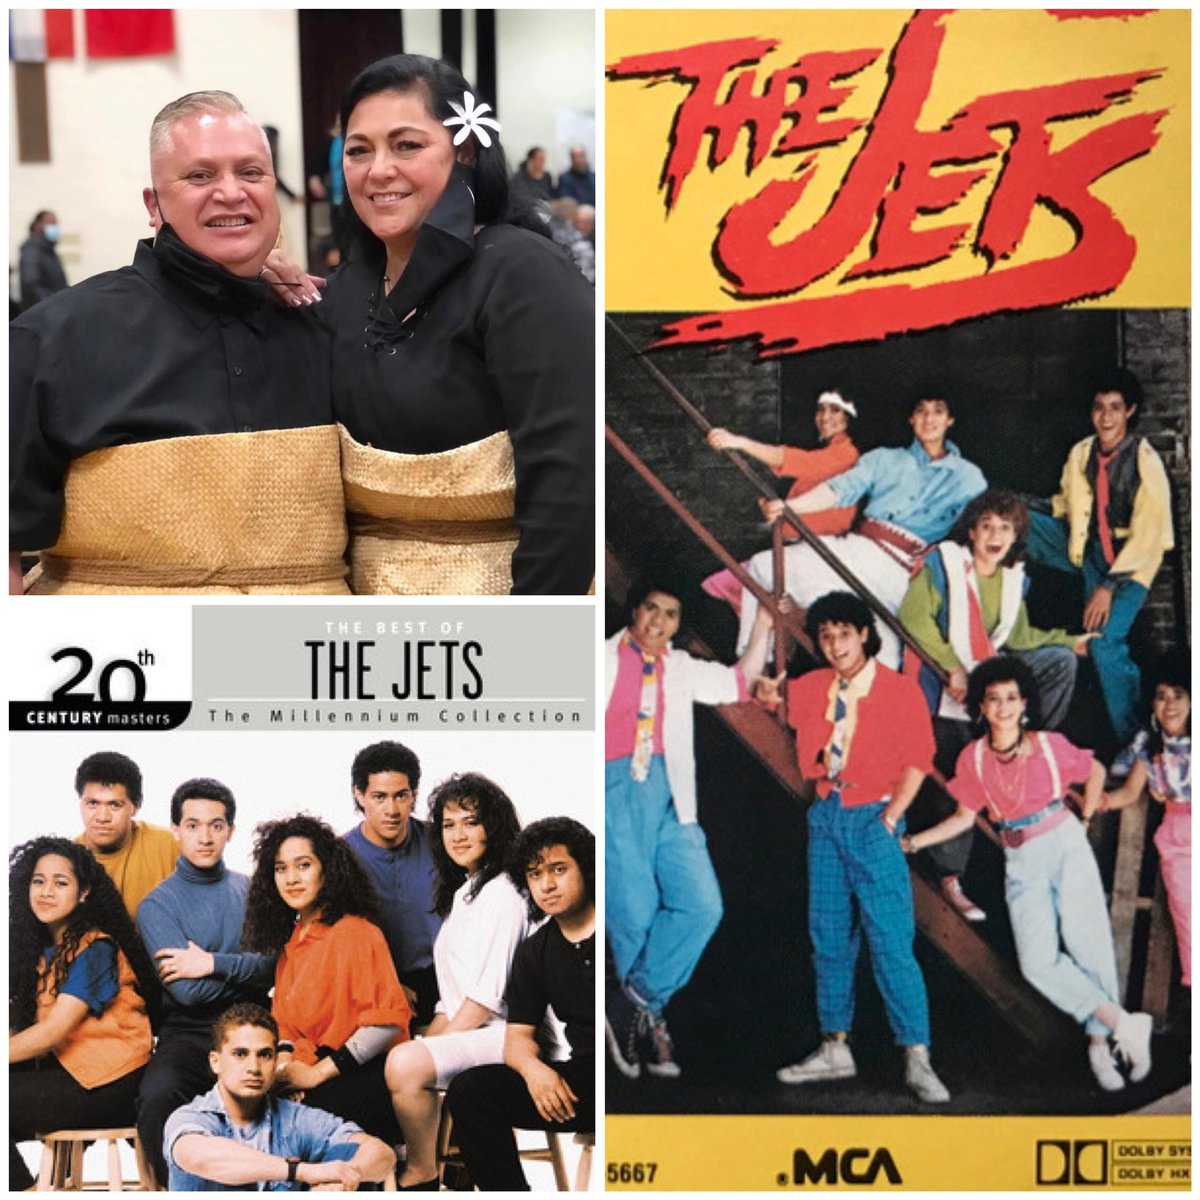 Many of you know my wife (Liz) was the lead singer for “The Jets.” However, only some of you know the entire band are siblings. Right now, I’m listening to Liz tell stories to our kids about their Uncle Gene; he passed away earlier this week in SLC and my family leaves